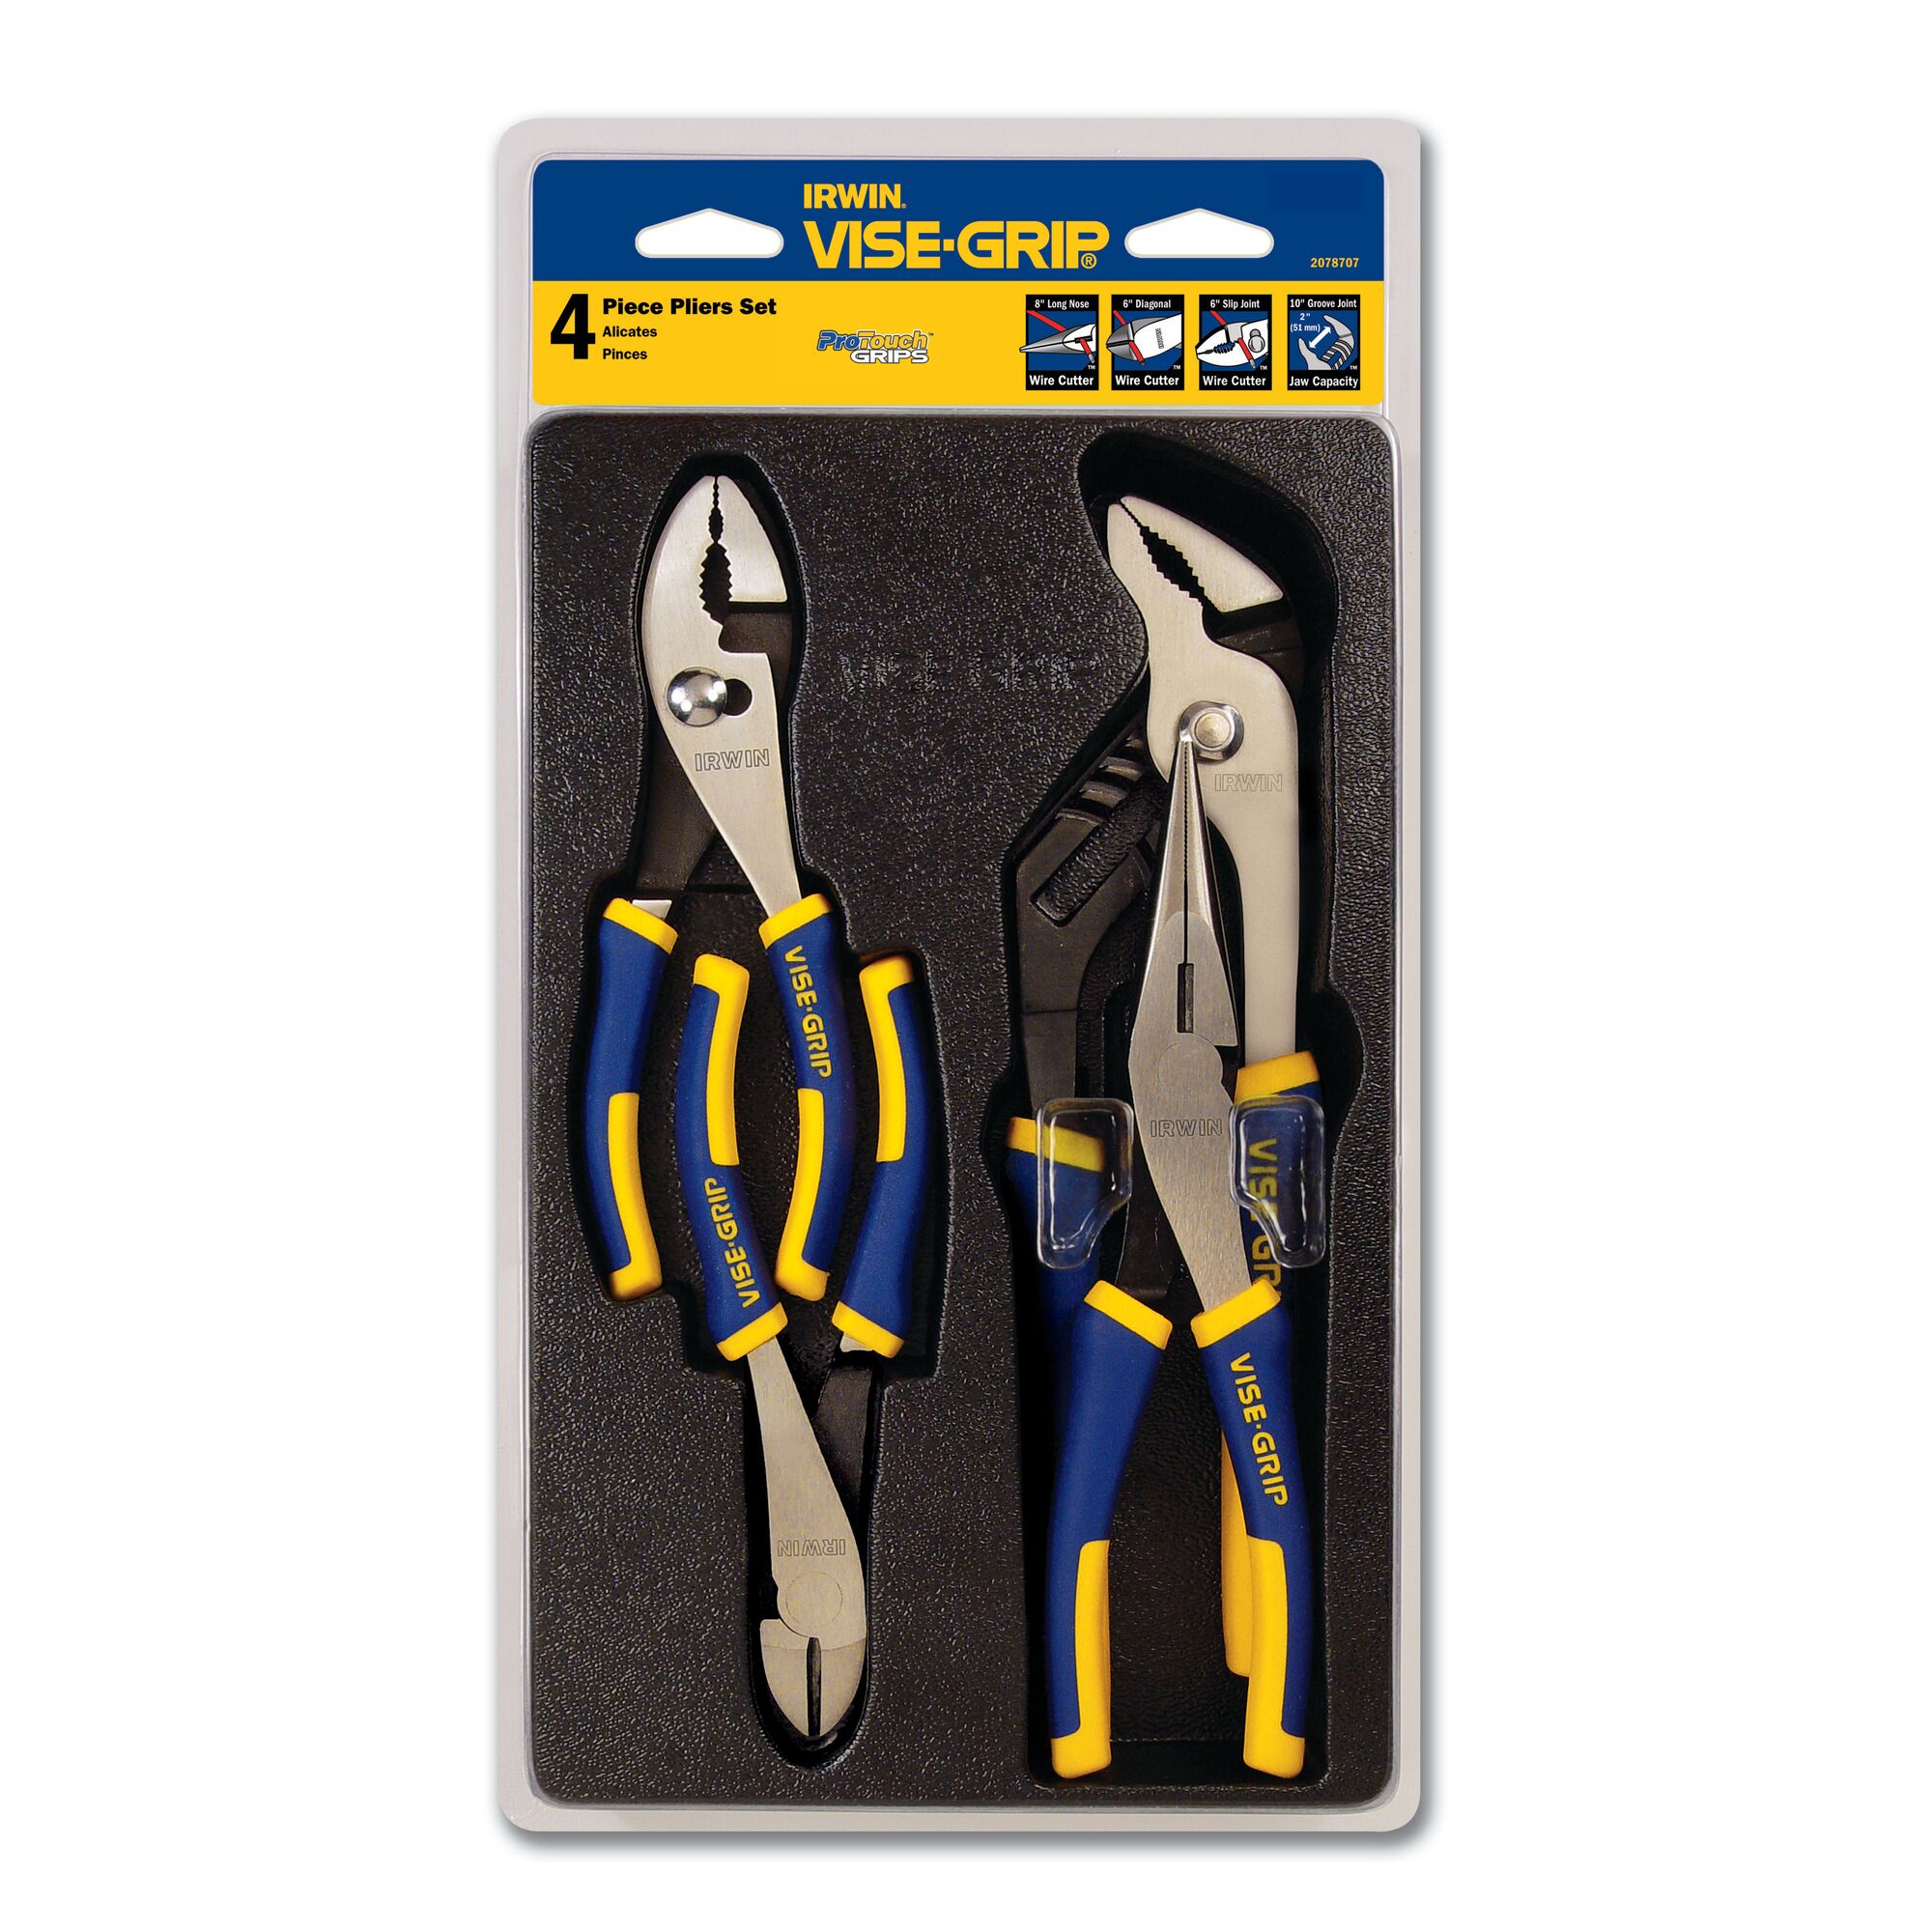 IRWIN VISE-GRIP ProPliers 4-Pack Assorted Pliers with Hard Case